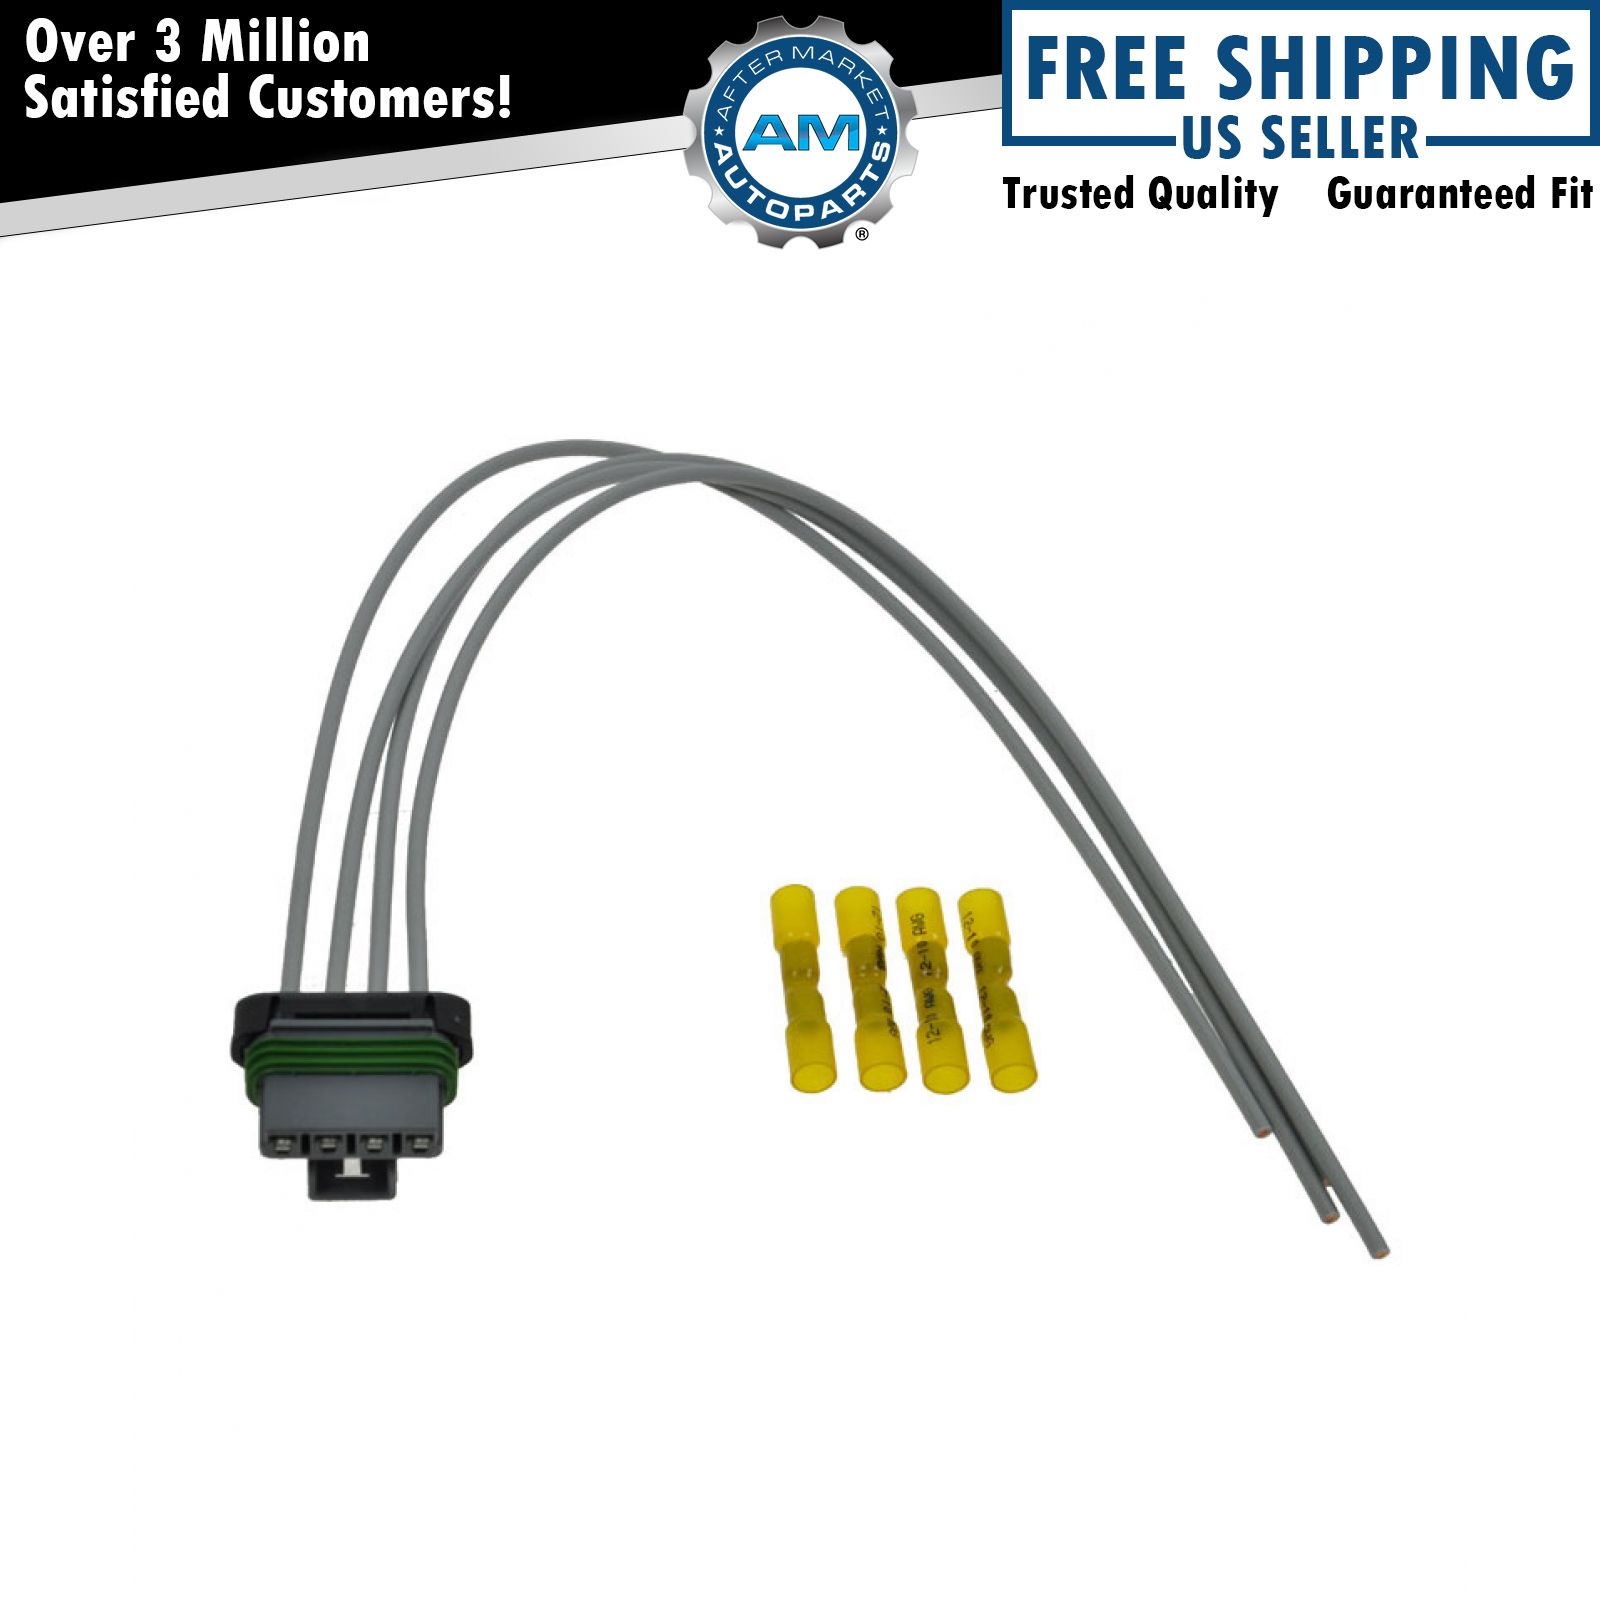 AC DELCO Electrical Connector w/ Pigtail Wire for GM Car Van SUV Pickup Truck